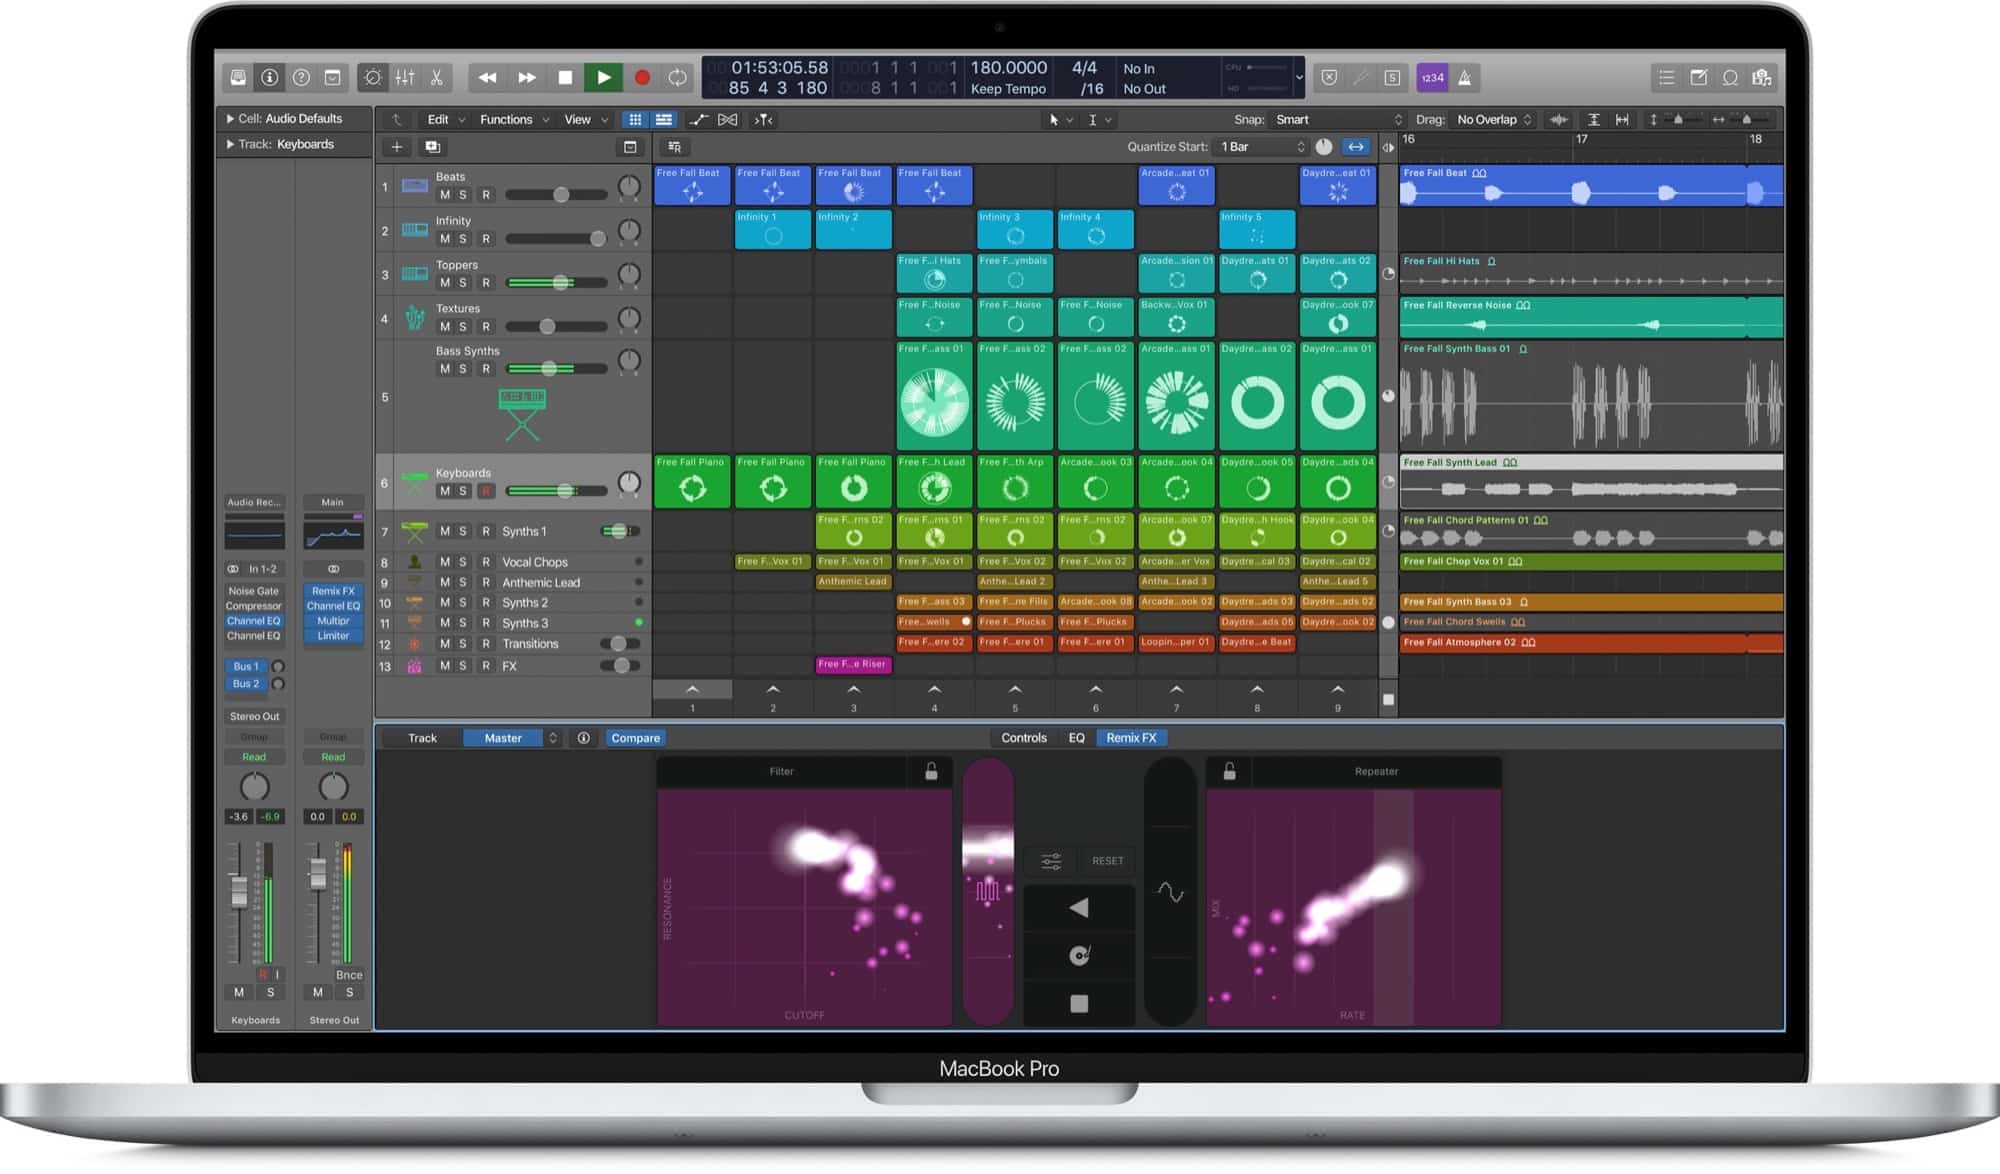 Logic Pro X Live Loops: This screenshot shows an as-yet unreleased version of Logic Pro X